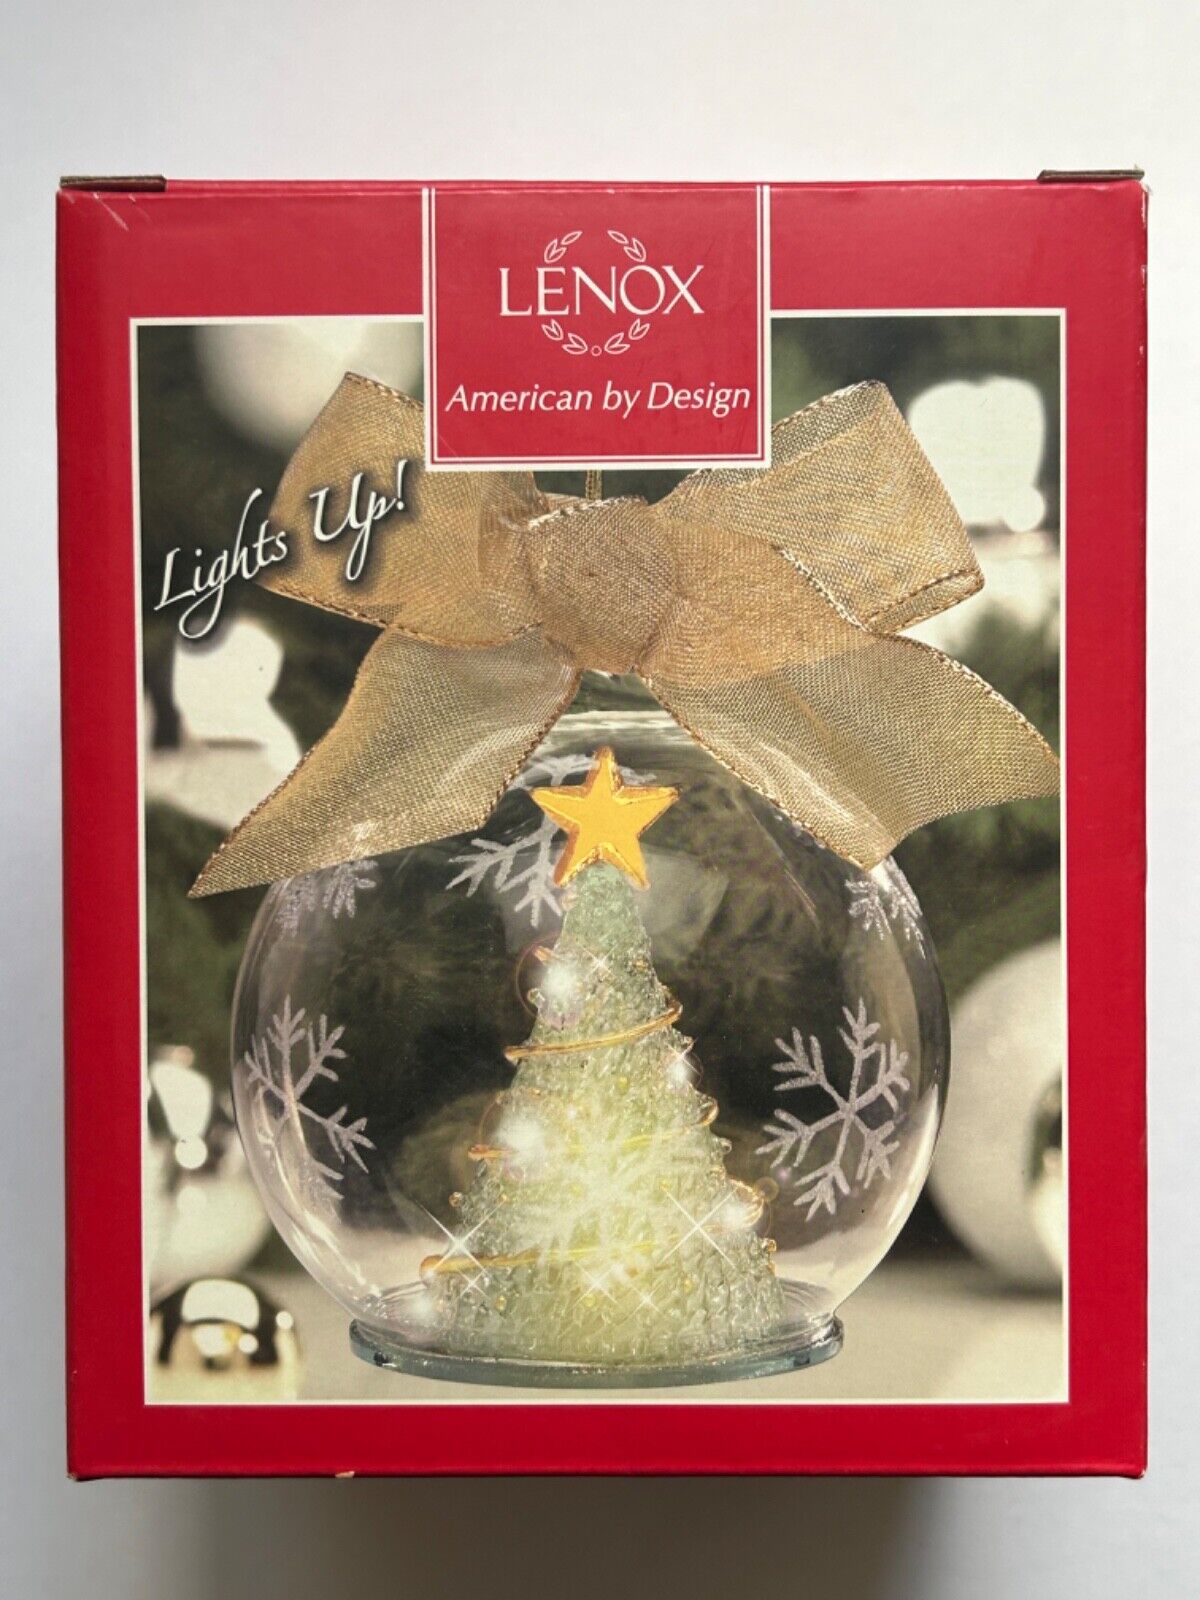 Lenox Wonder Ball, Tree Lit Ornament, Glass, Lights Up, Self Stands, Pre-Owned